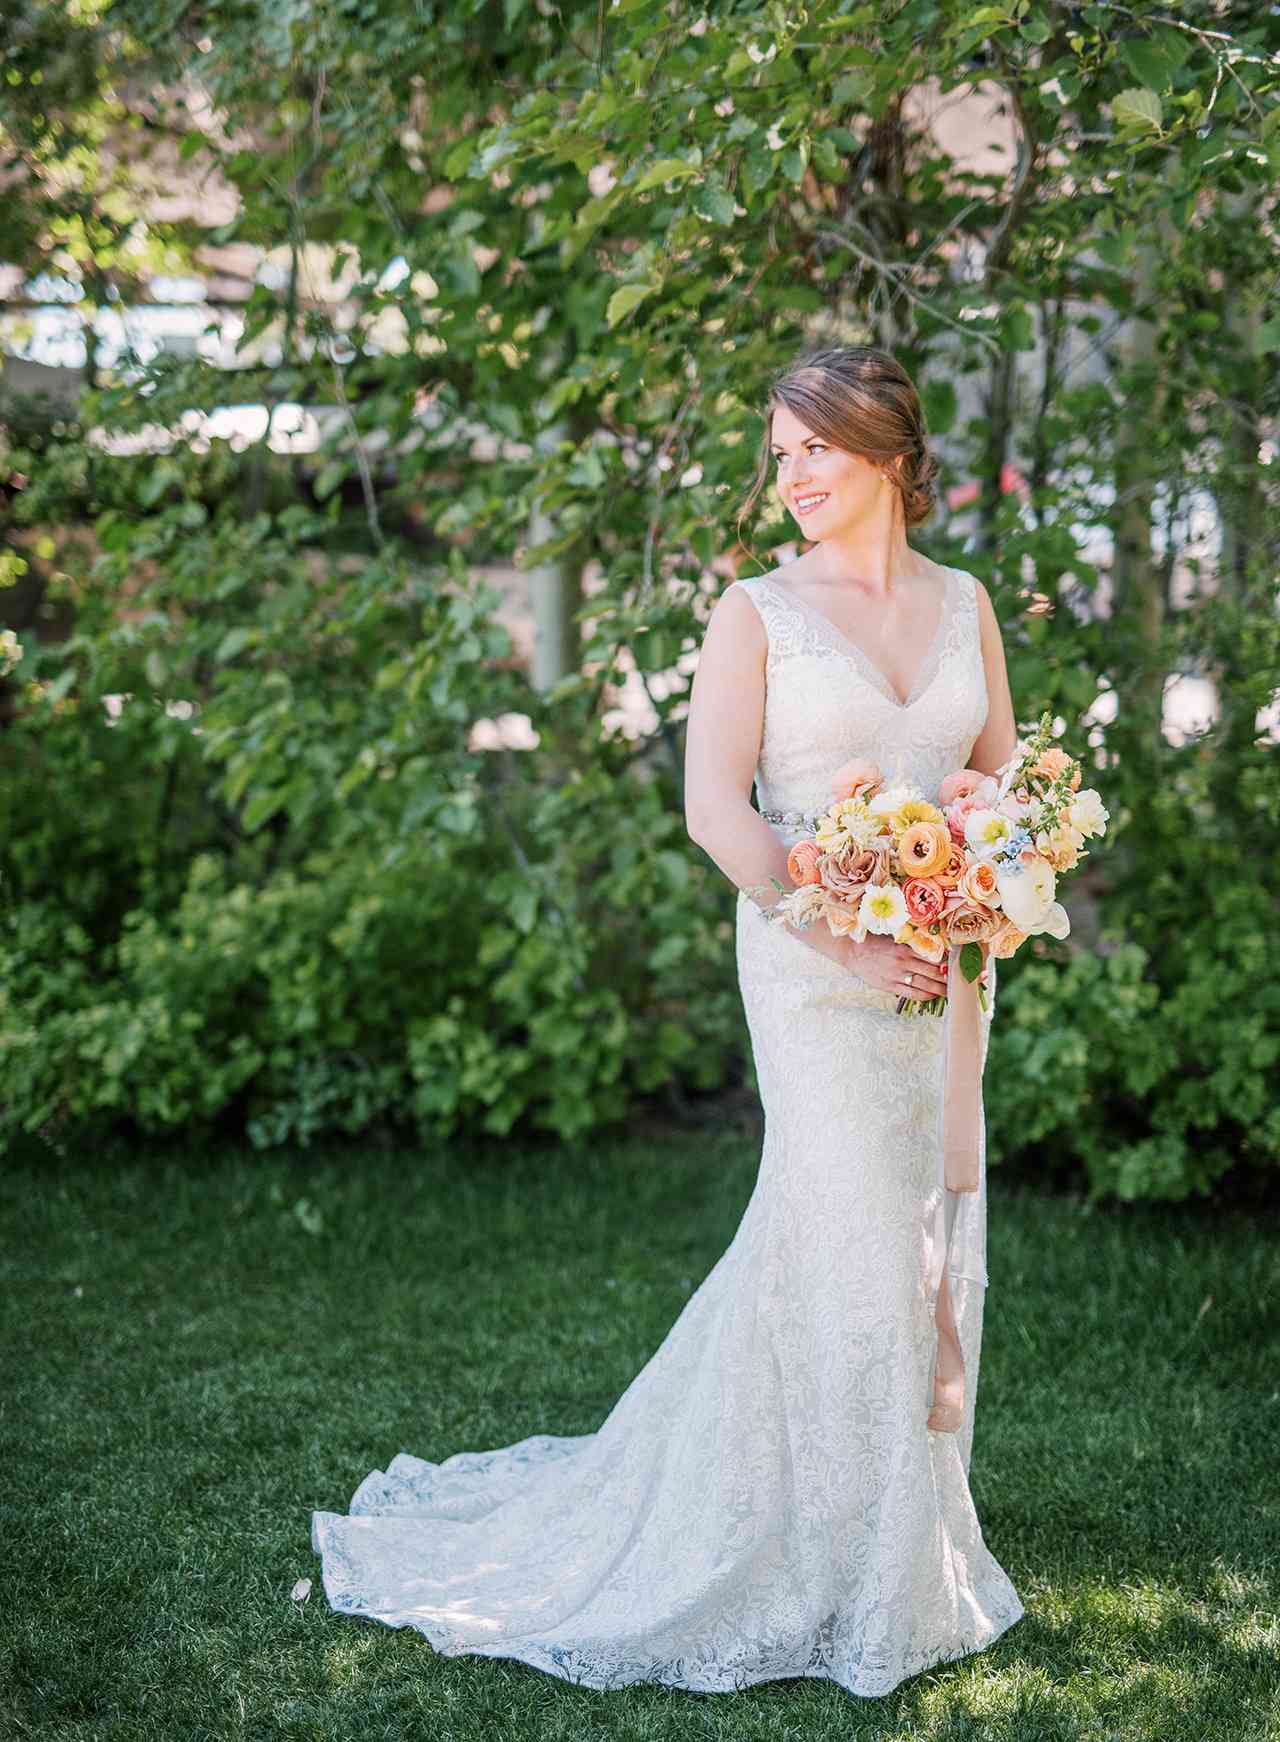 A Delicate Lace Wedding Dress